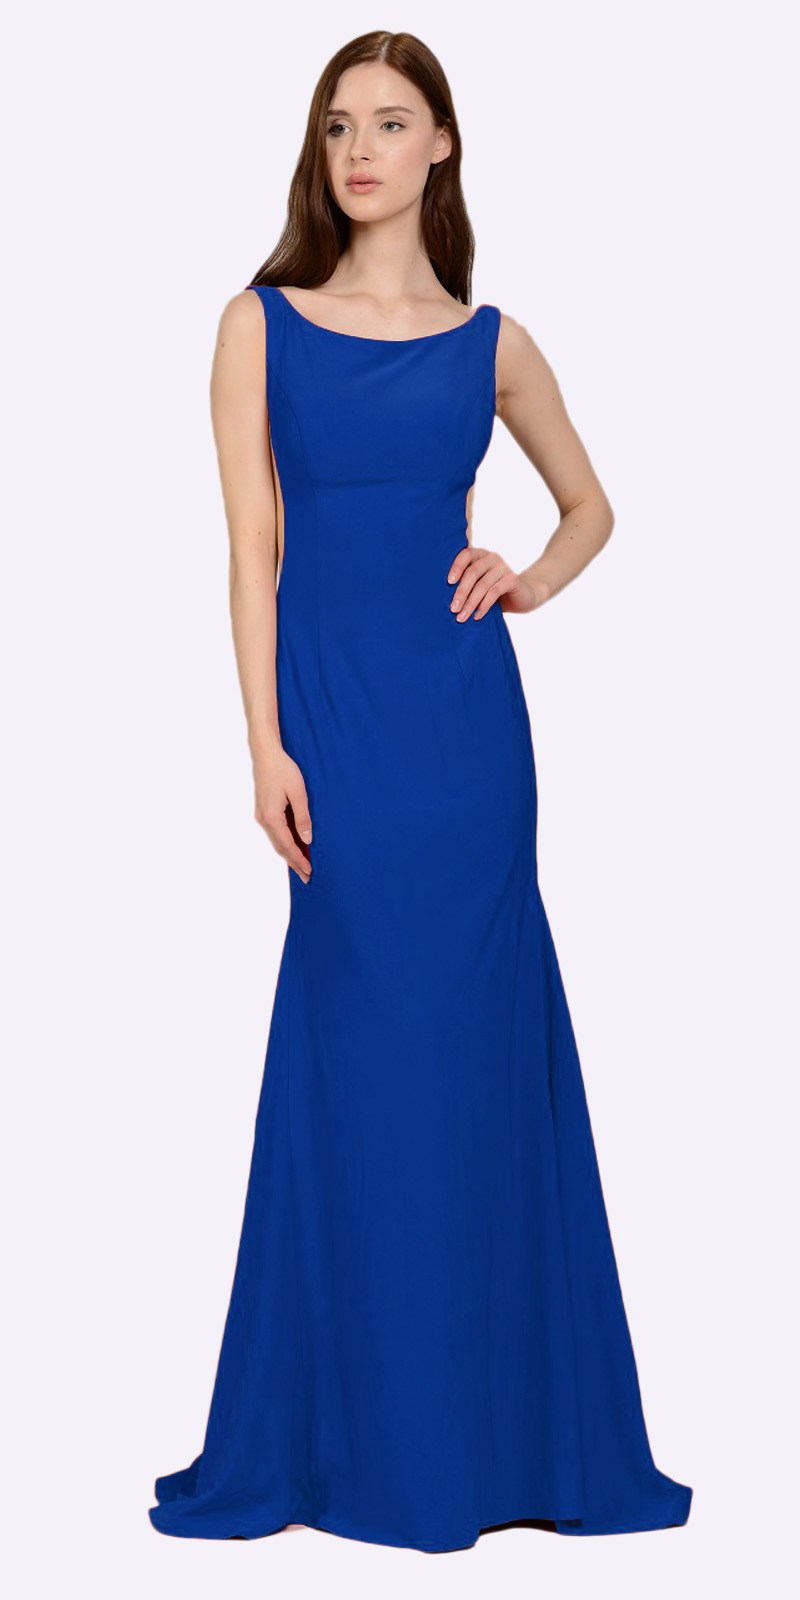 Poly USA 8168 Royal Blue Long Formal Dress with Sheer Side Cut-Outs and Slit